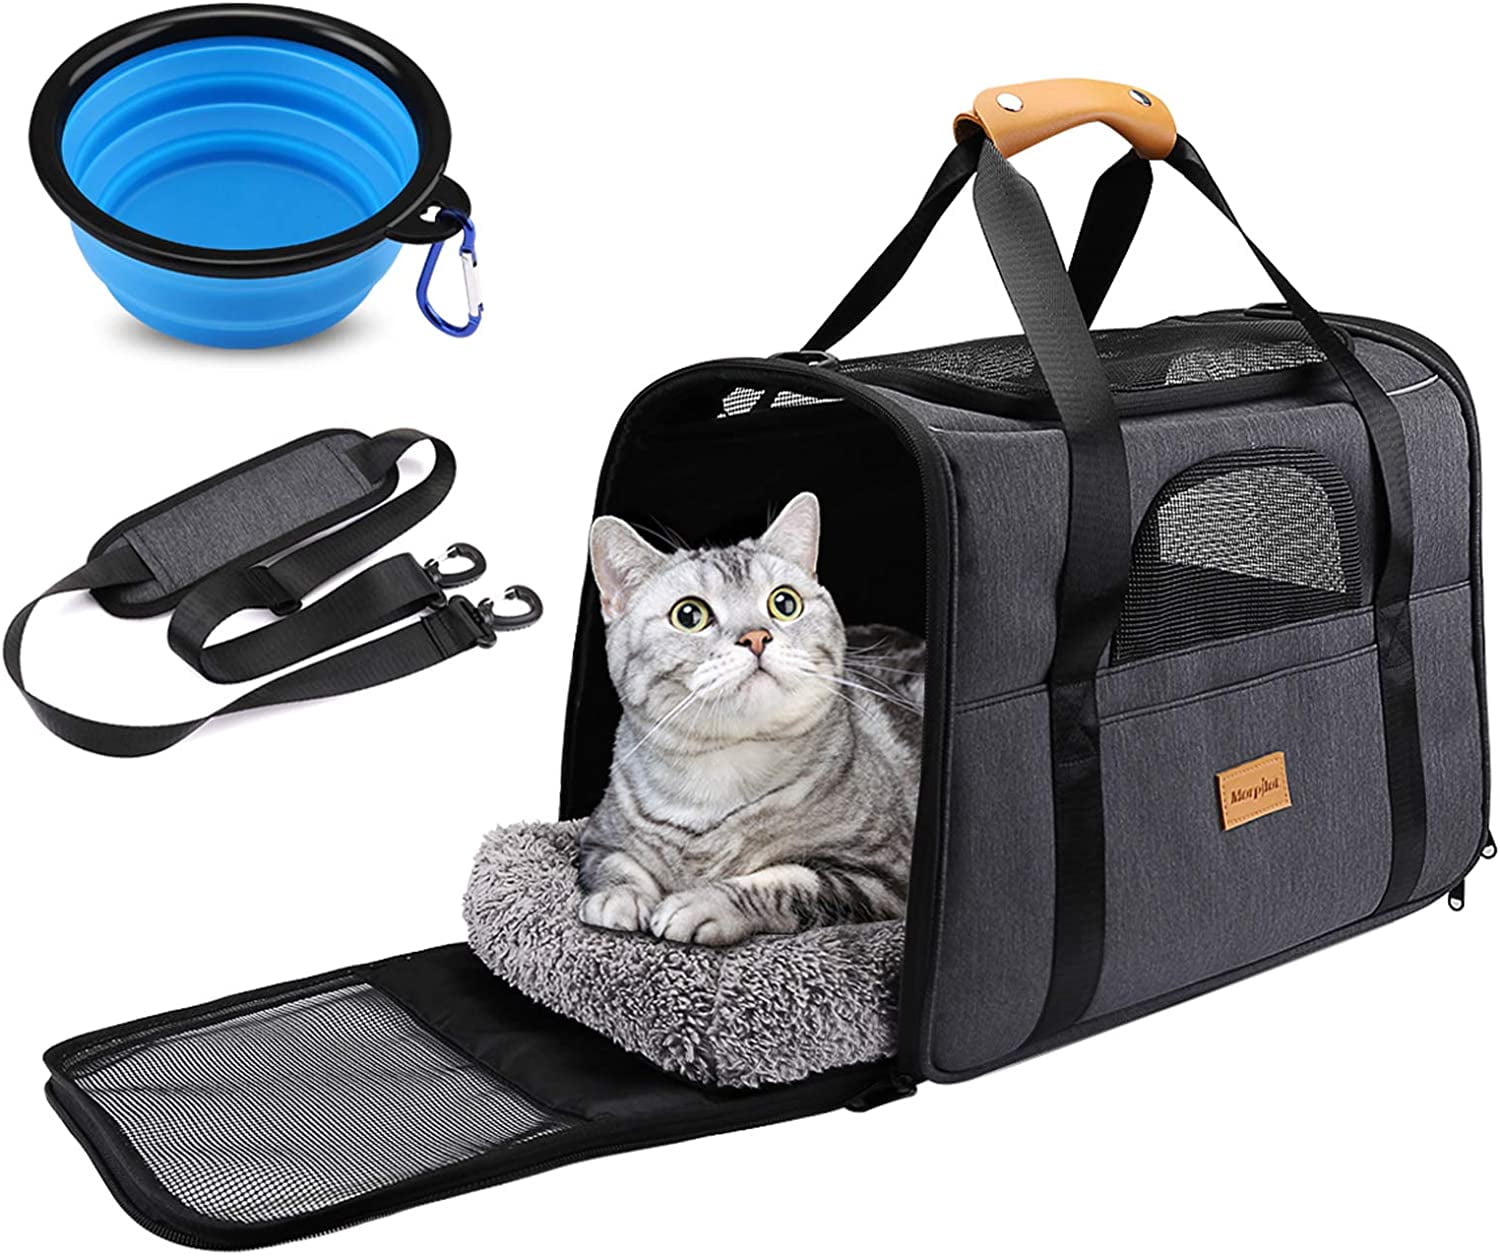 Morpilot Pet Travel Carrier Bag, Soft-Sided Dog Carrier Cat Carrier Pet  Carrier (18 x 12.5 x 14 Inches), for Large Cats and Medium Puppies,  W/Locking